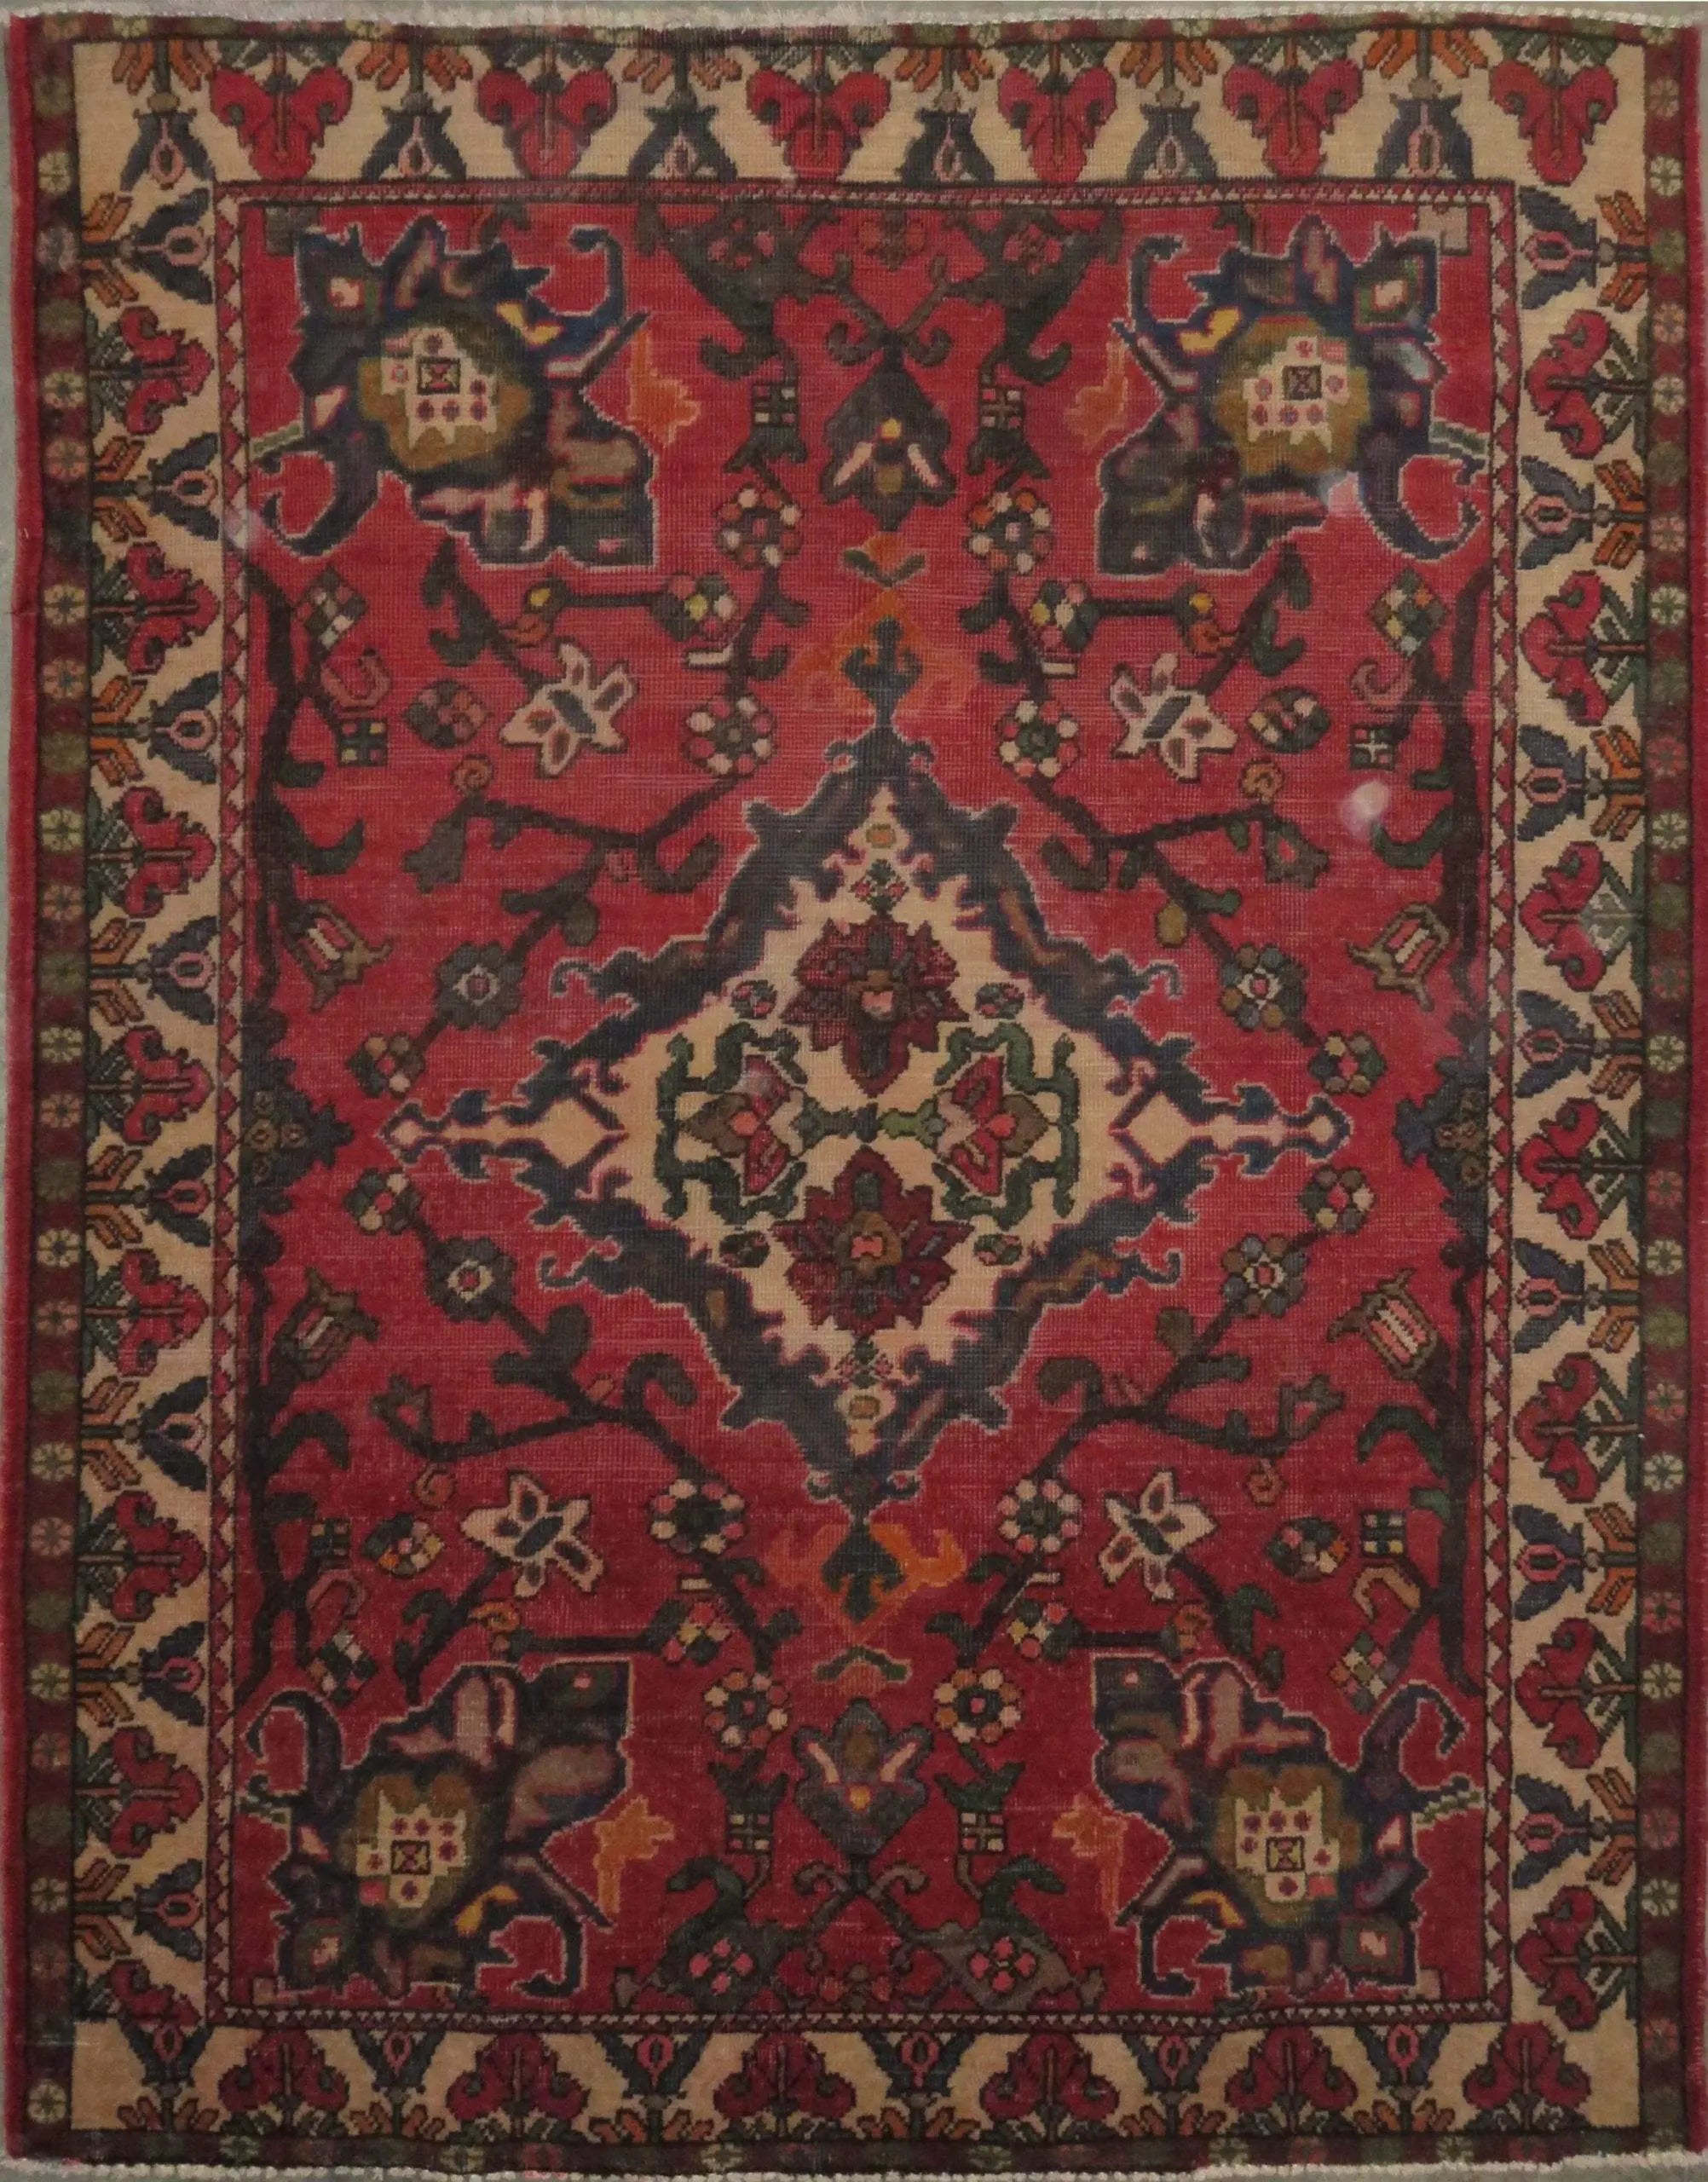 Hand-Knotted Persian Wool Rug _ Luxurious Vintage Design, 6'6" x 4'9", Artisan Crafted